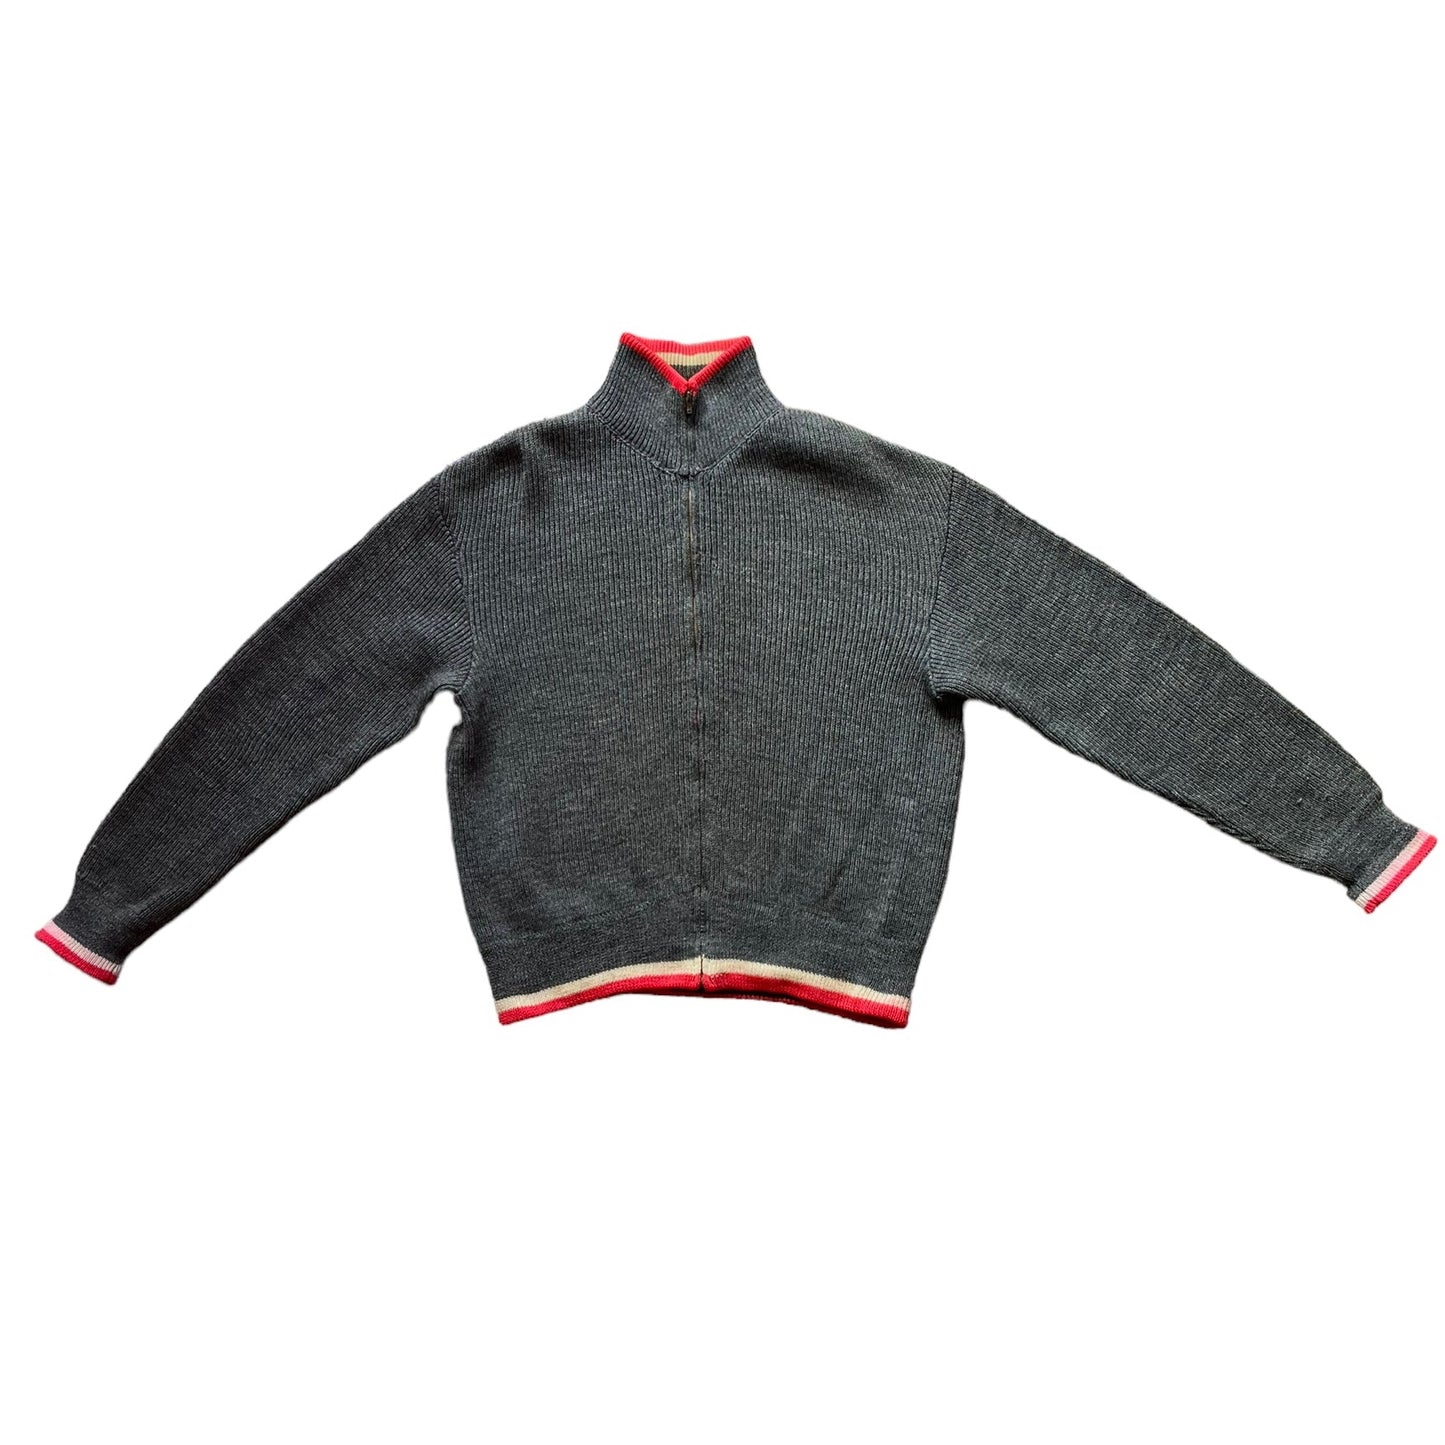 Full front view of Vintage 1950s Lasley-Seattle Avalanche Zip-up Sweater